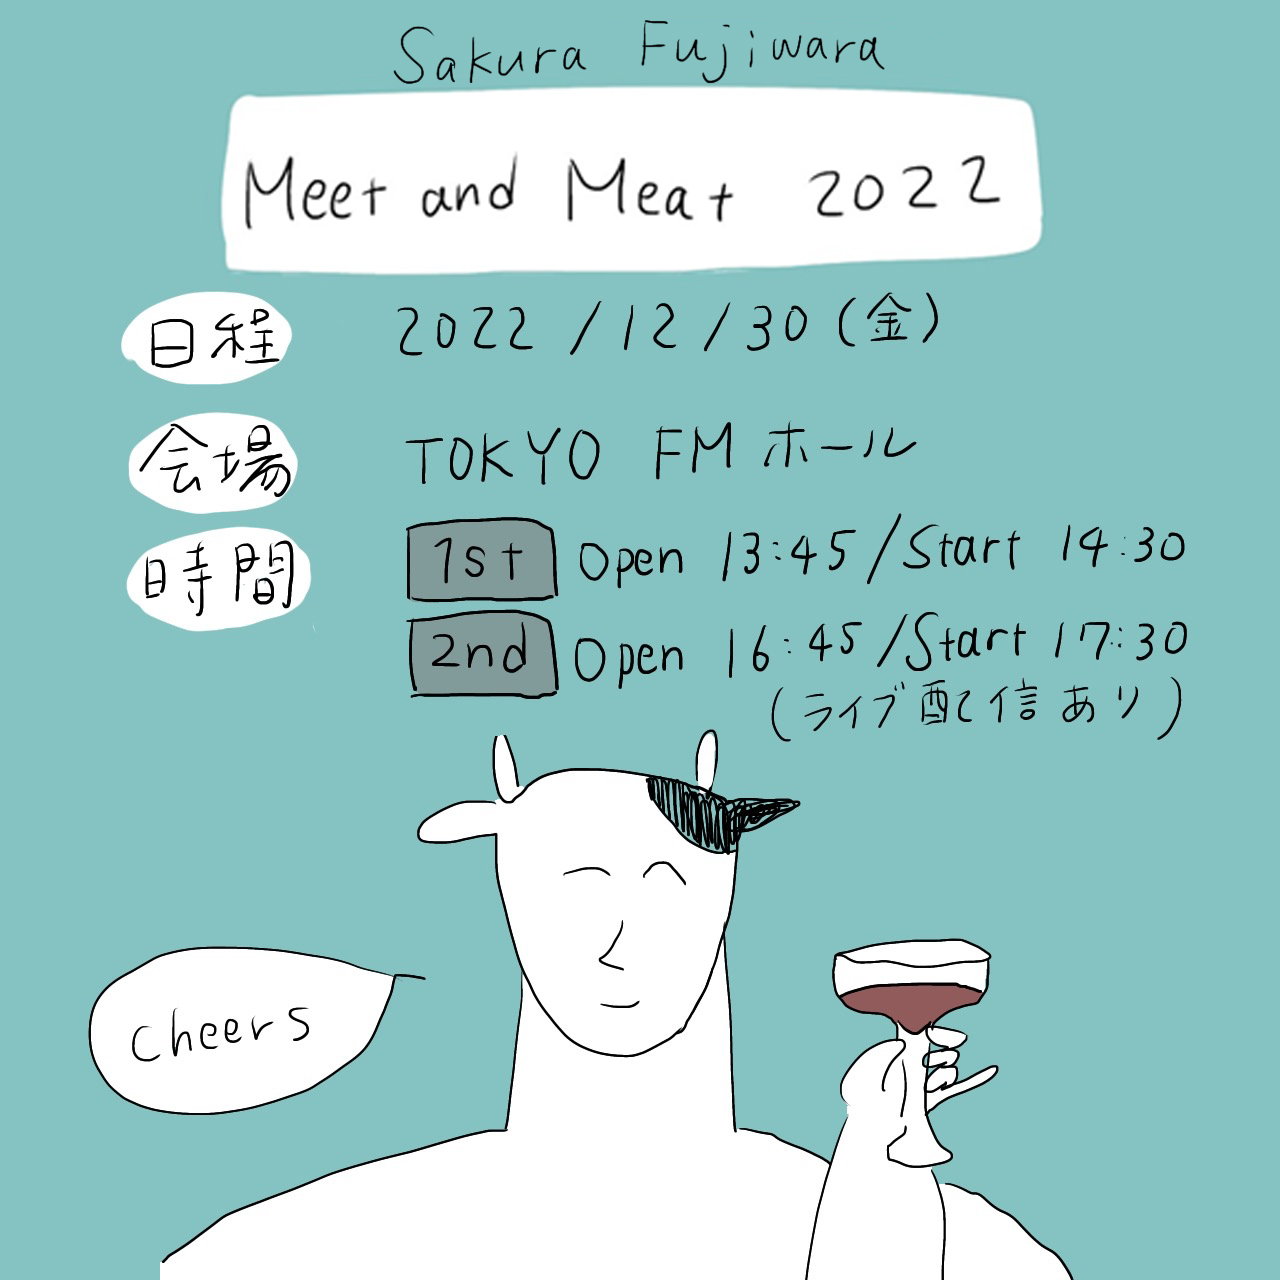 Meating会員限定イベント『Meet and Meat 2022』チケット2次受付（先着）実施決定！